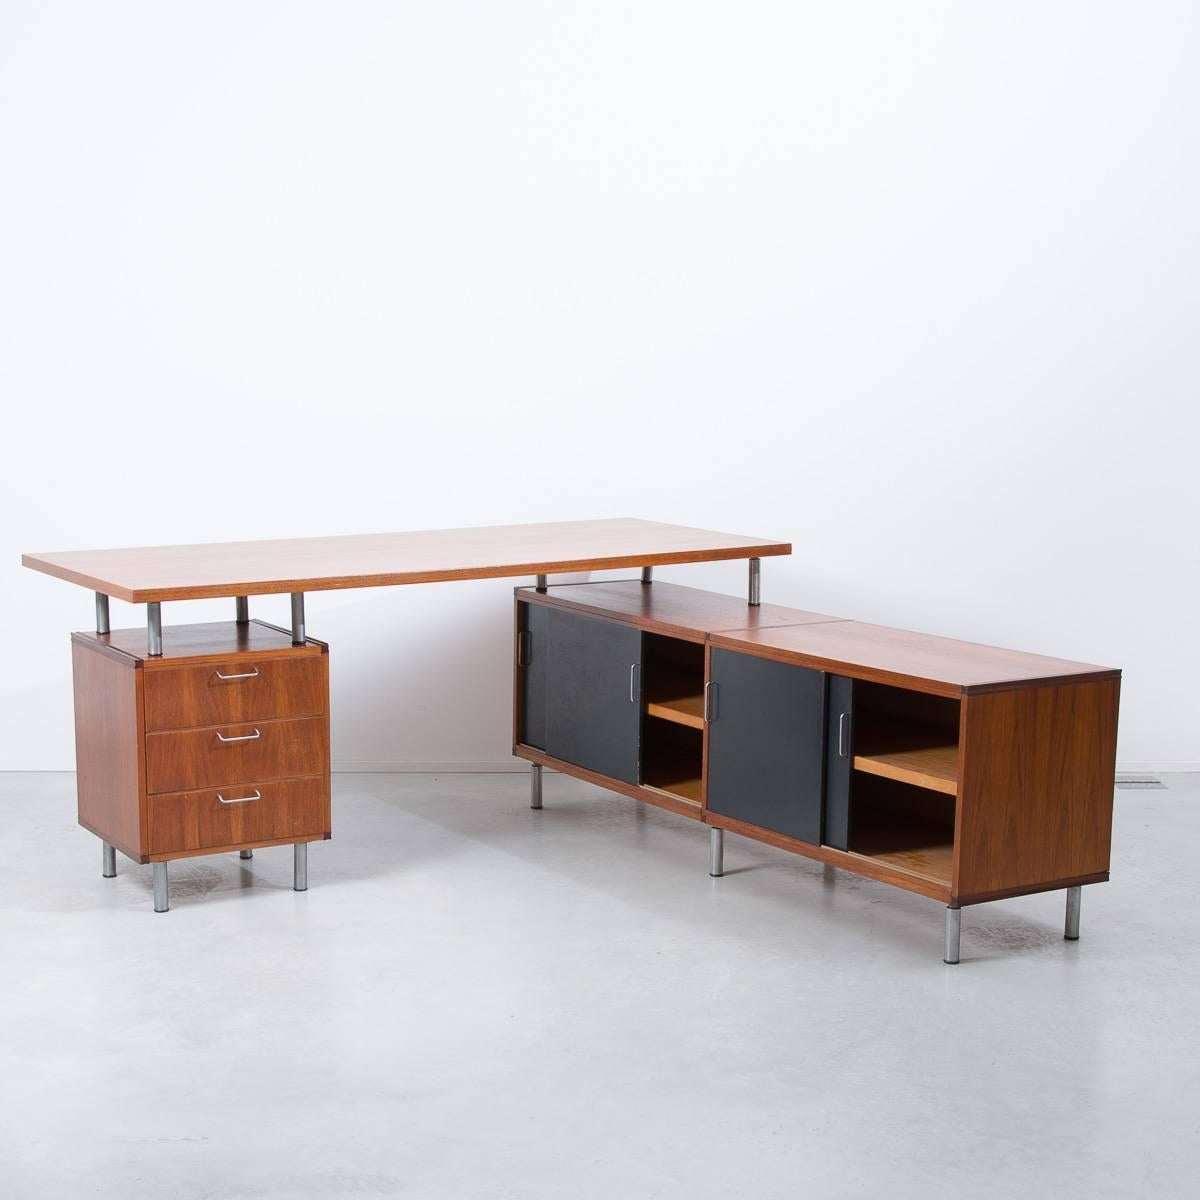 Large teak executive’s desk in an L-shape with useful cabinet with black laminate doors. Designed by Cees Braakman for his modular custom built series for Pastoe, Netherlands. Shows his signature curved birch ply drawers inside.

Great refinished